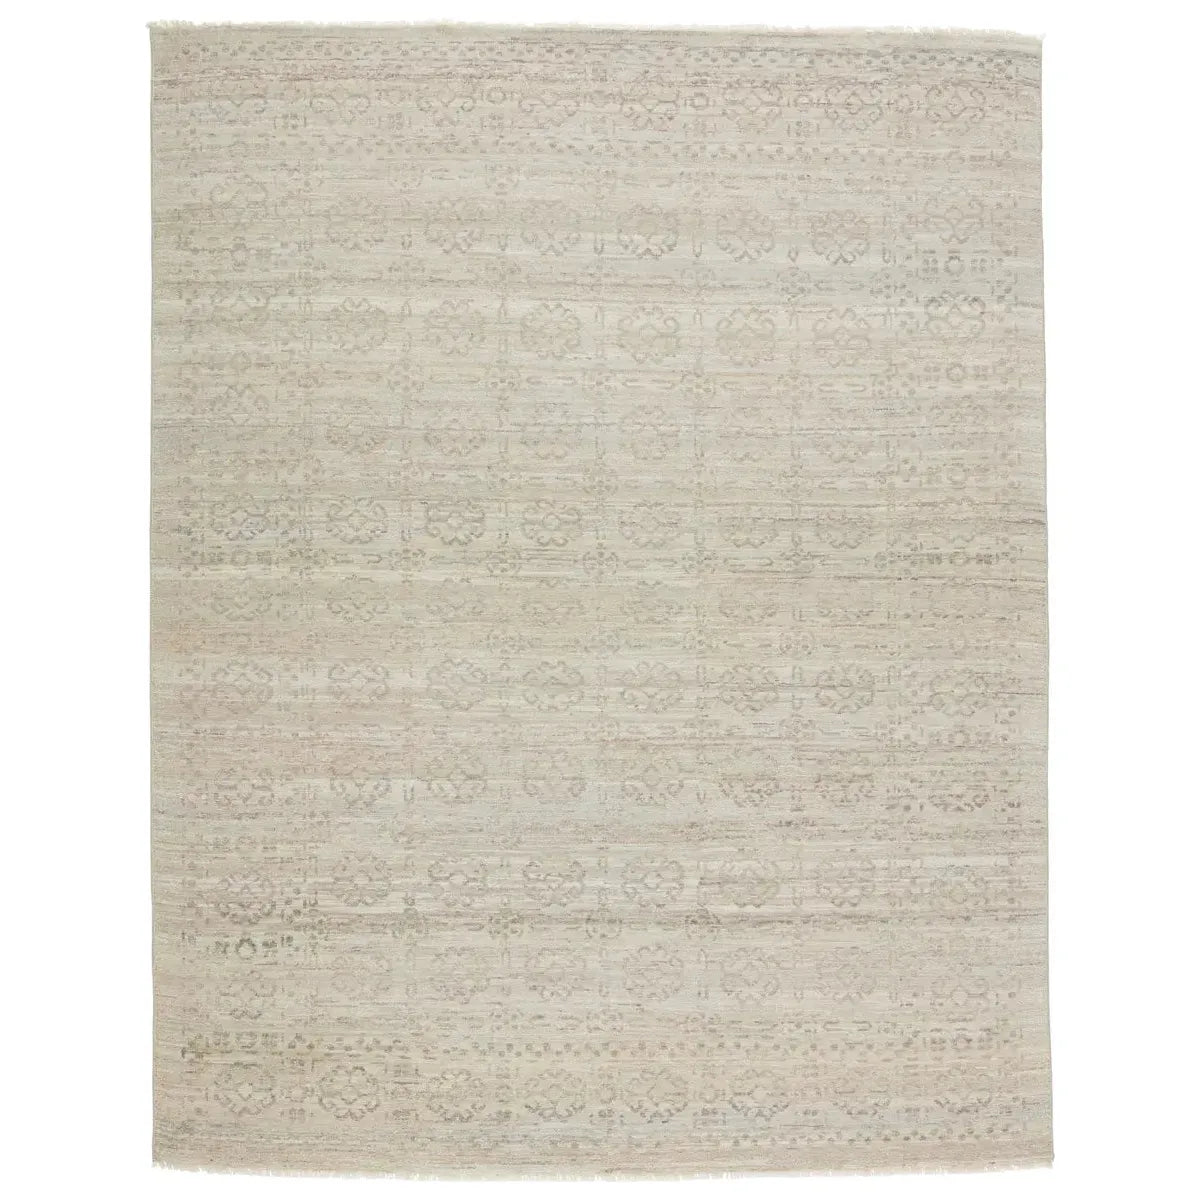 The Orenda collection features heirloom-quality designs of muted and uniquely updated Old World patterns. The Amalia area rug boasts a beautifully washed tile motif with delicate floral details. Amethyst Home provides interior design services, furniture, rugs, and lighting in the Seattle metro area. 